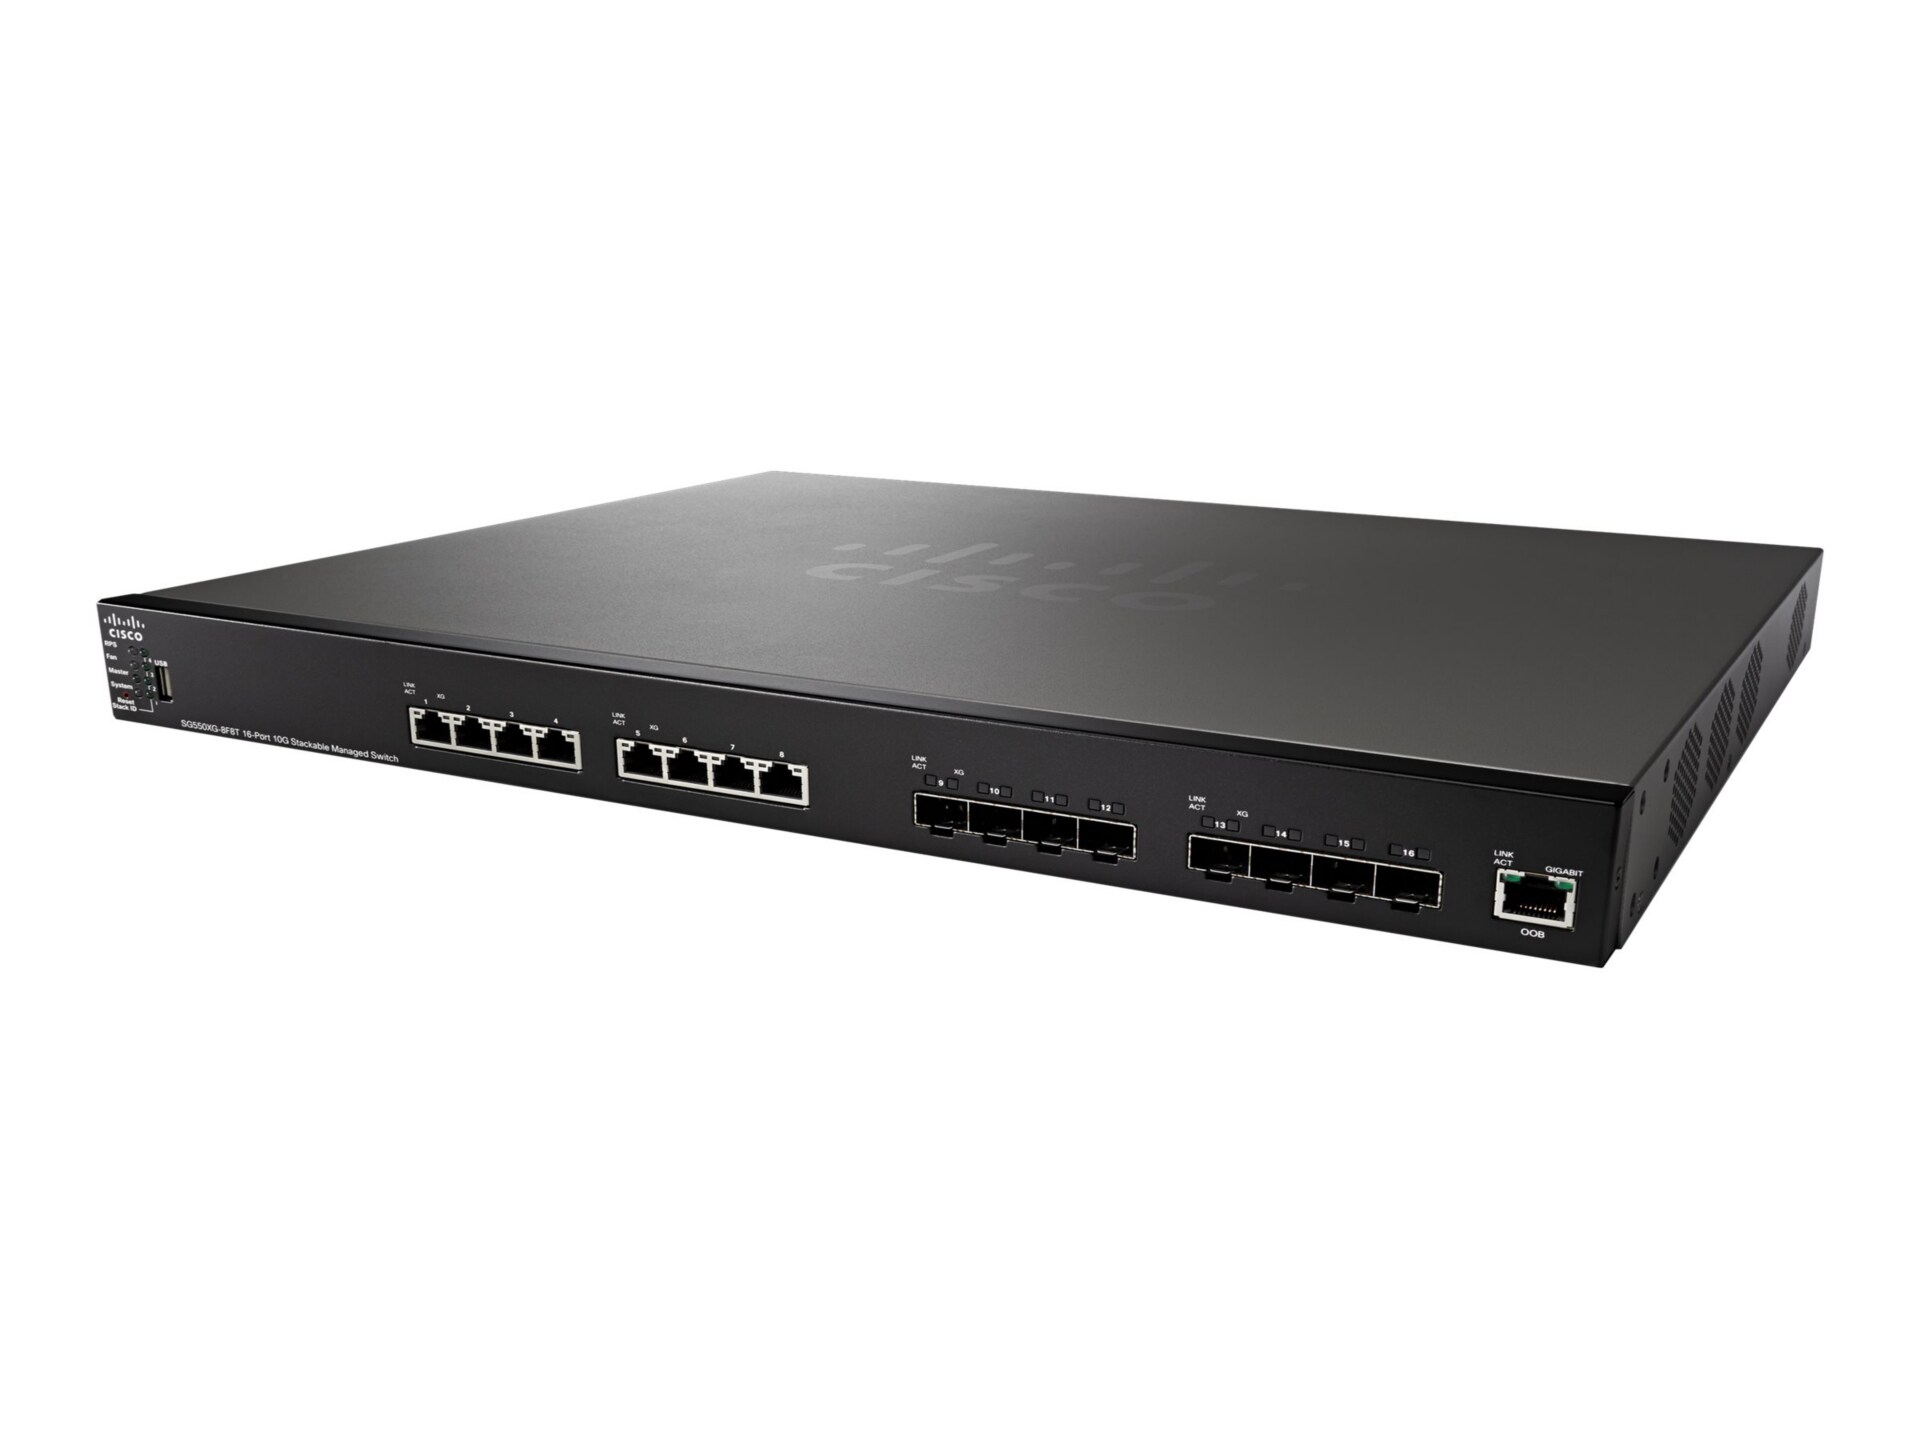 Cisco Small Business SG550XG-8F8T - switch - 16 ports - managed - rack-mountable